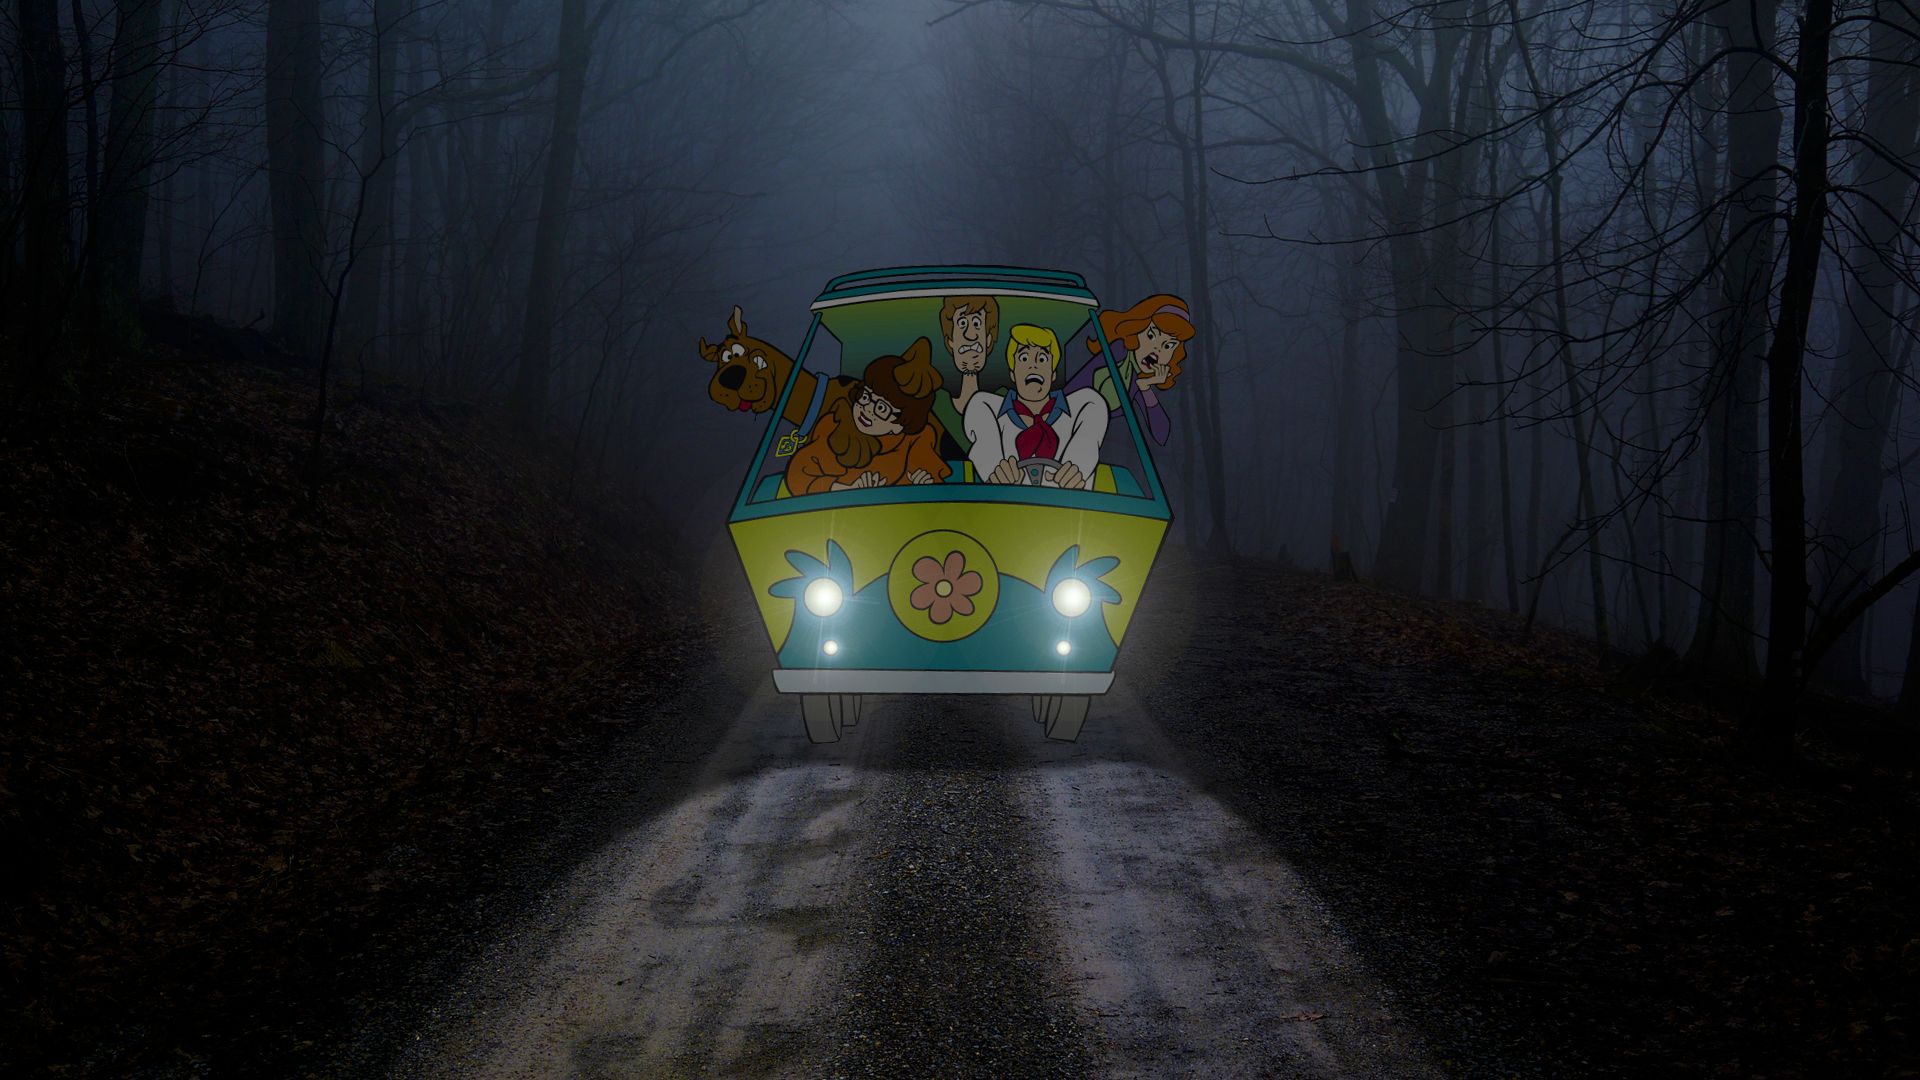 Scooby doo Characters Wallpaper for PC (3)